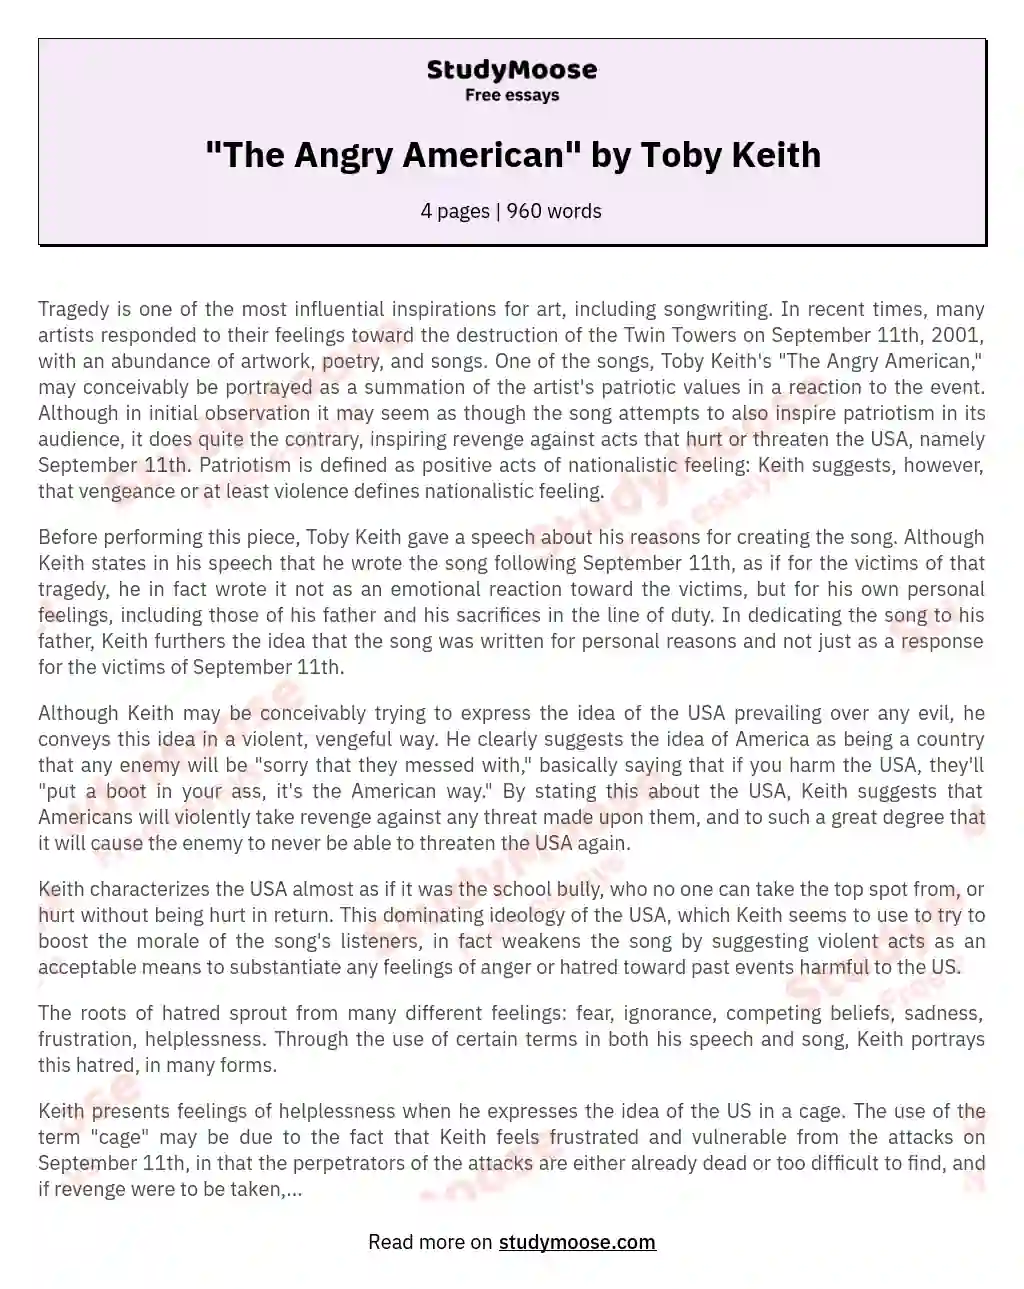 "The Angry American" by Toby Keith essay